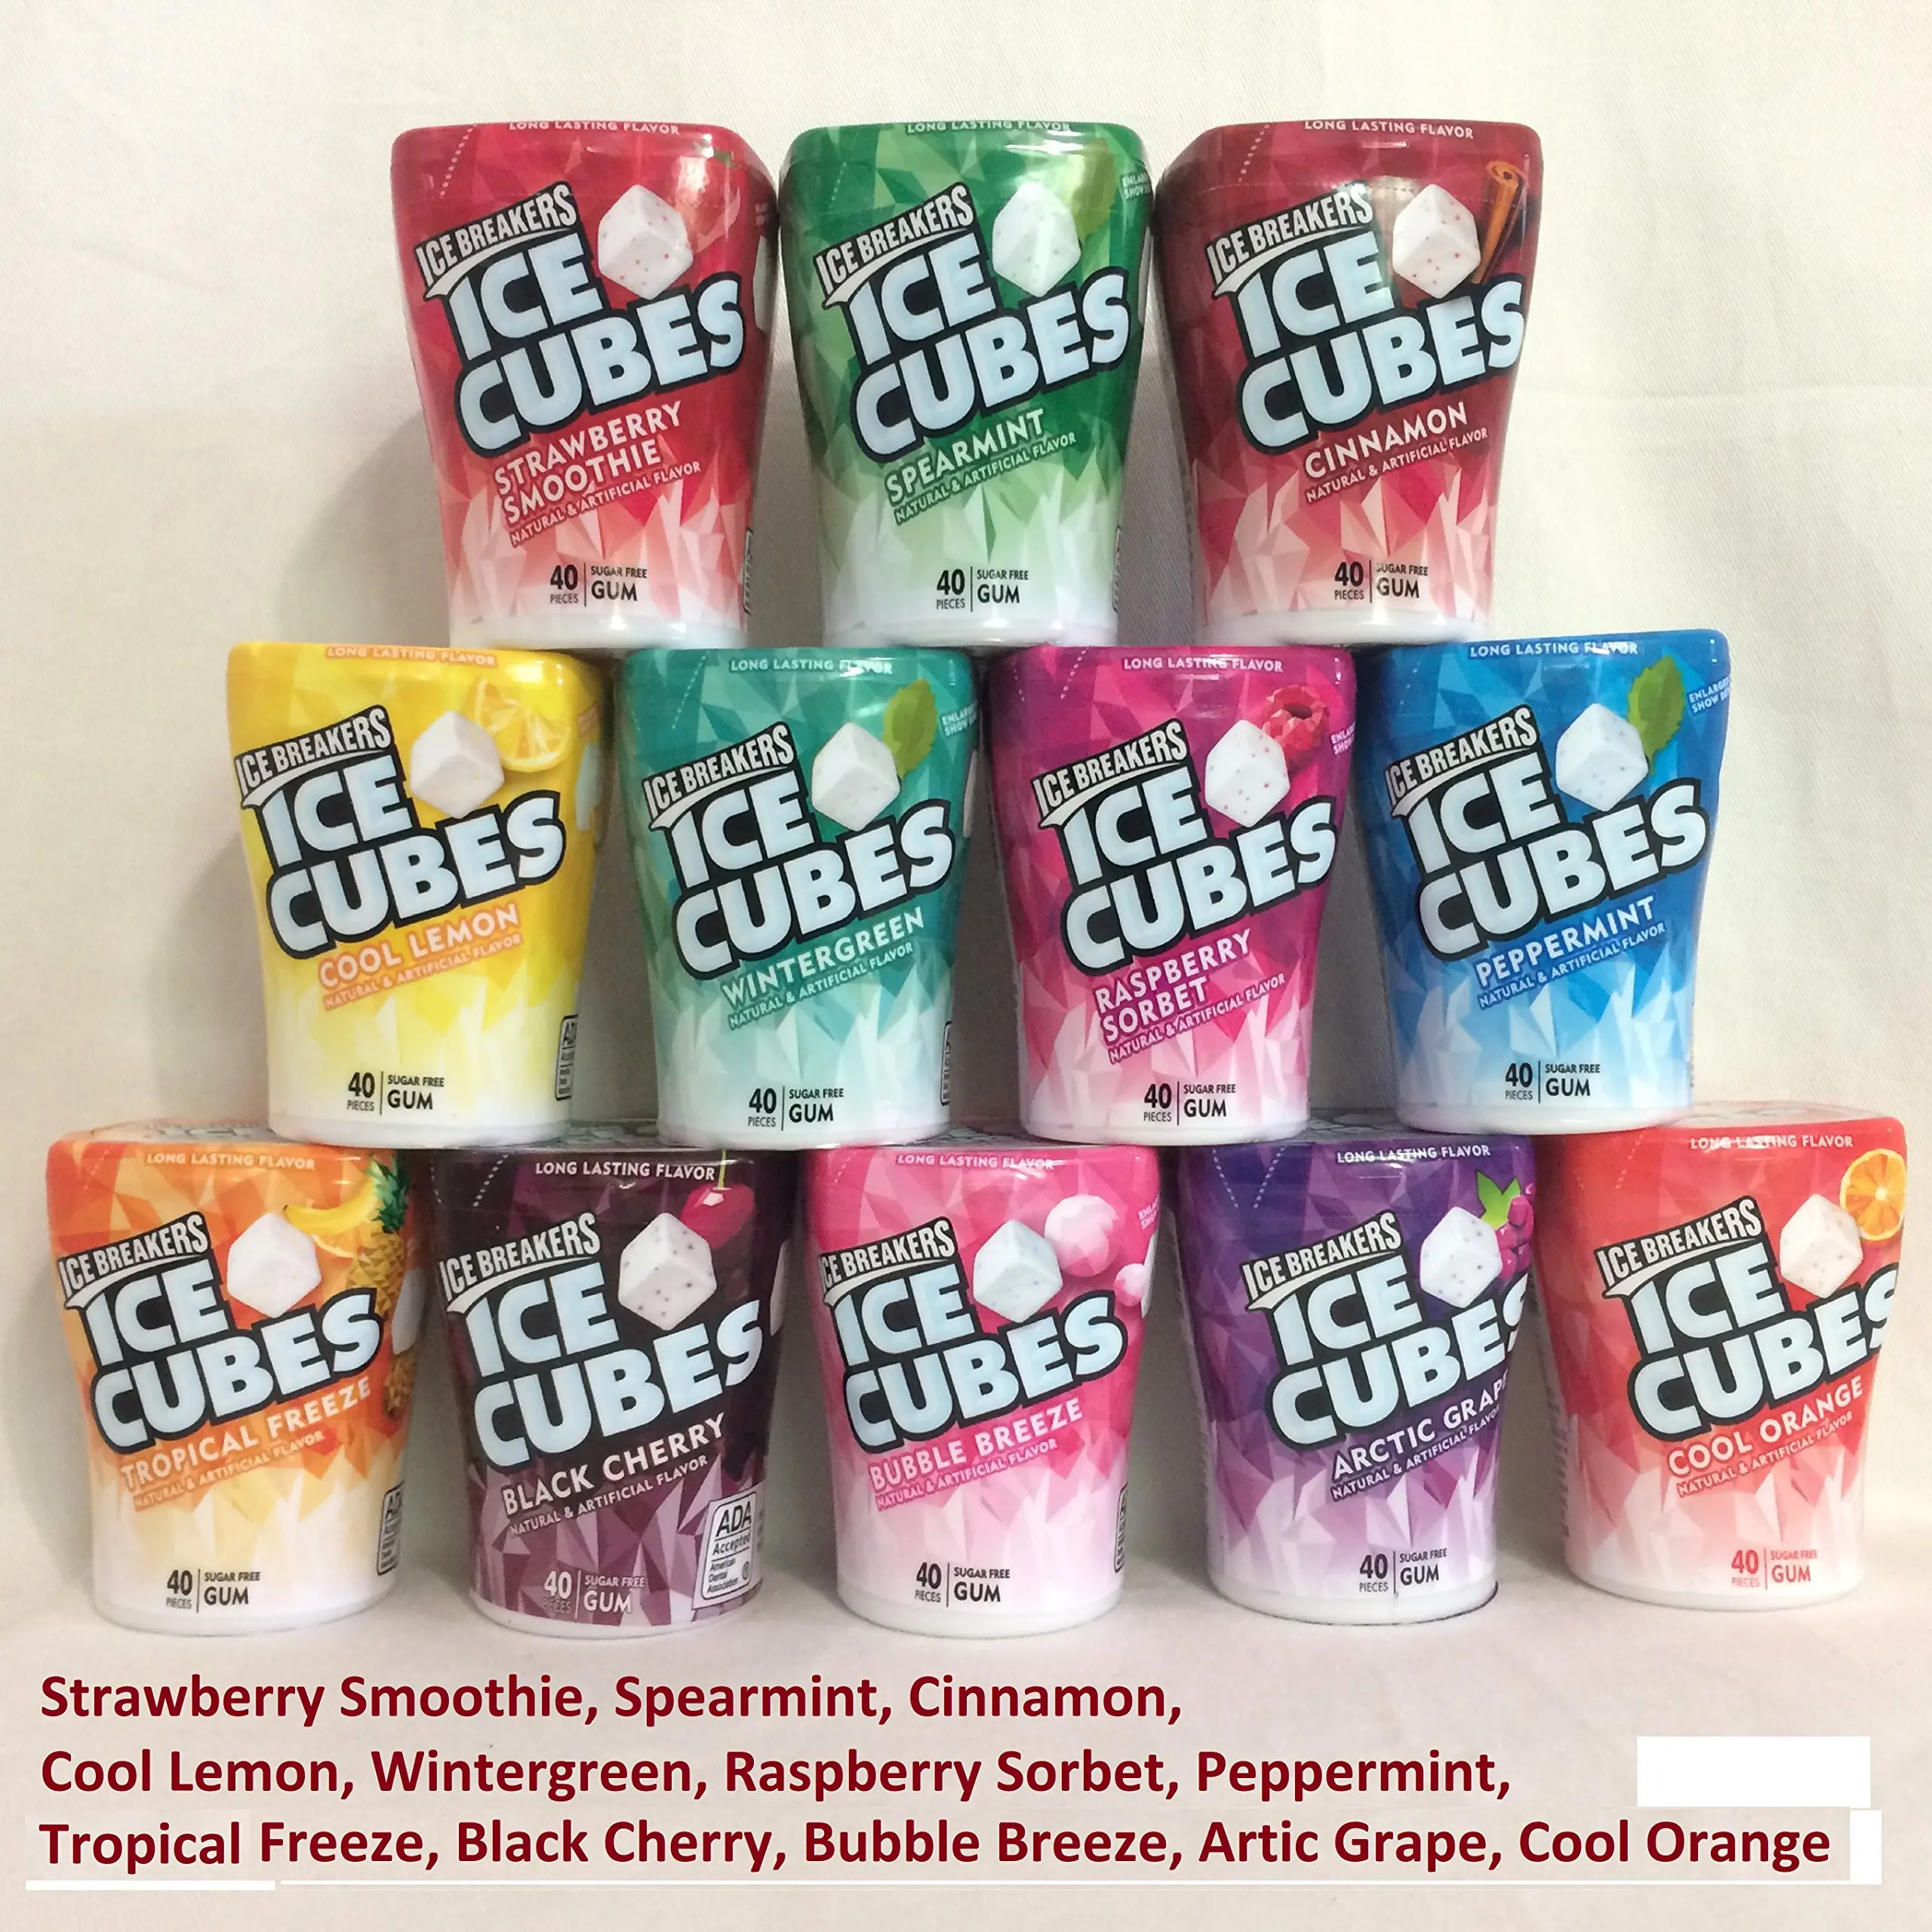 Cheap Ice Breakers Ice Cubes Gum Find Ice Breakers Ice Cubes Gum Deals